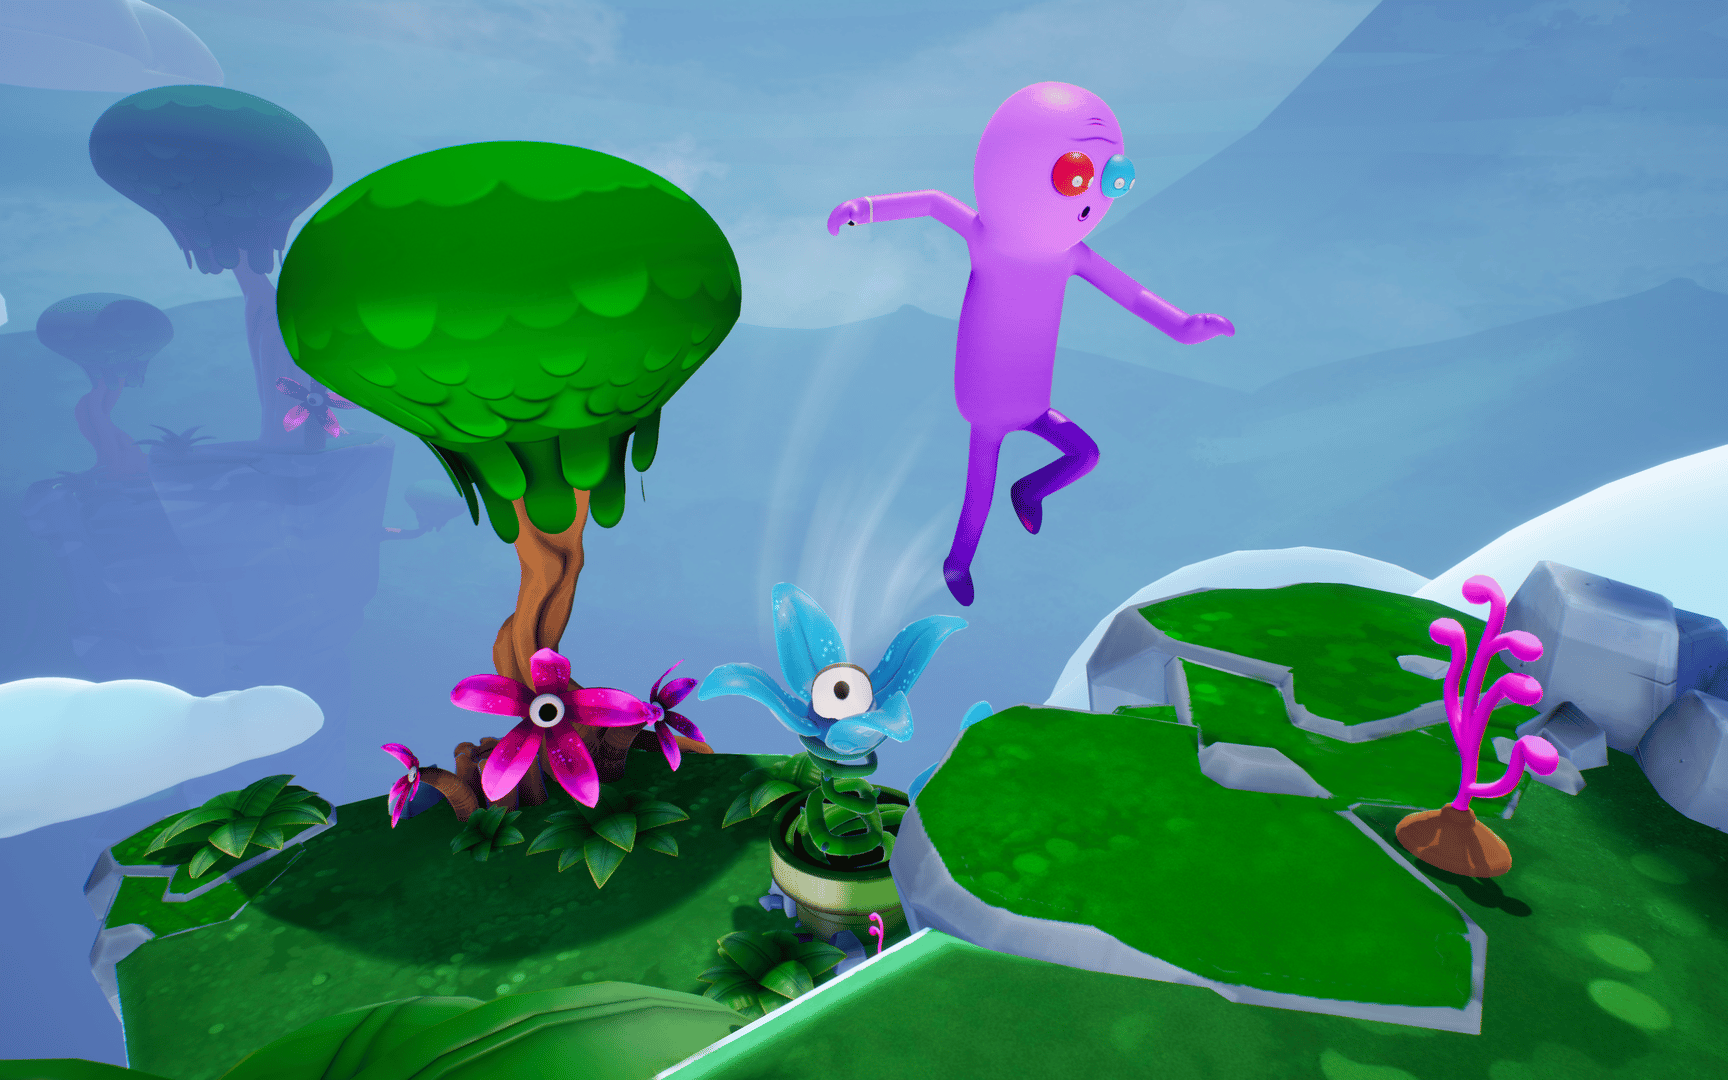 Trover Saves the Universe screenshot